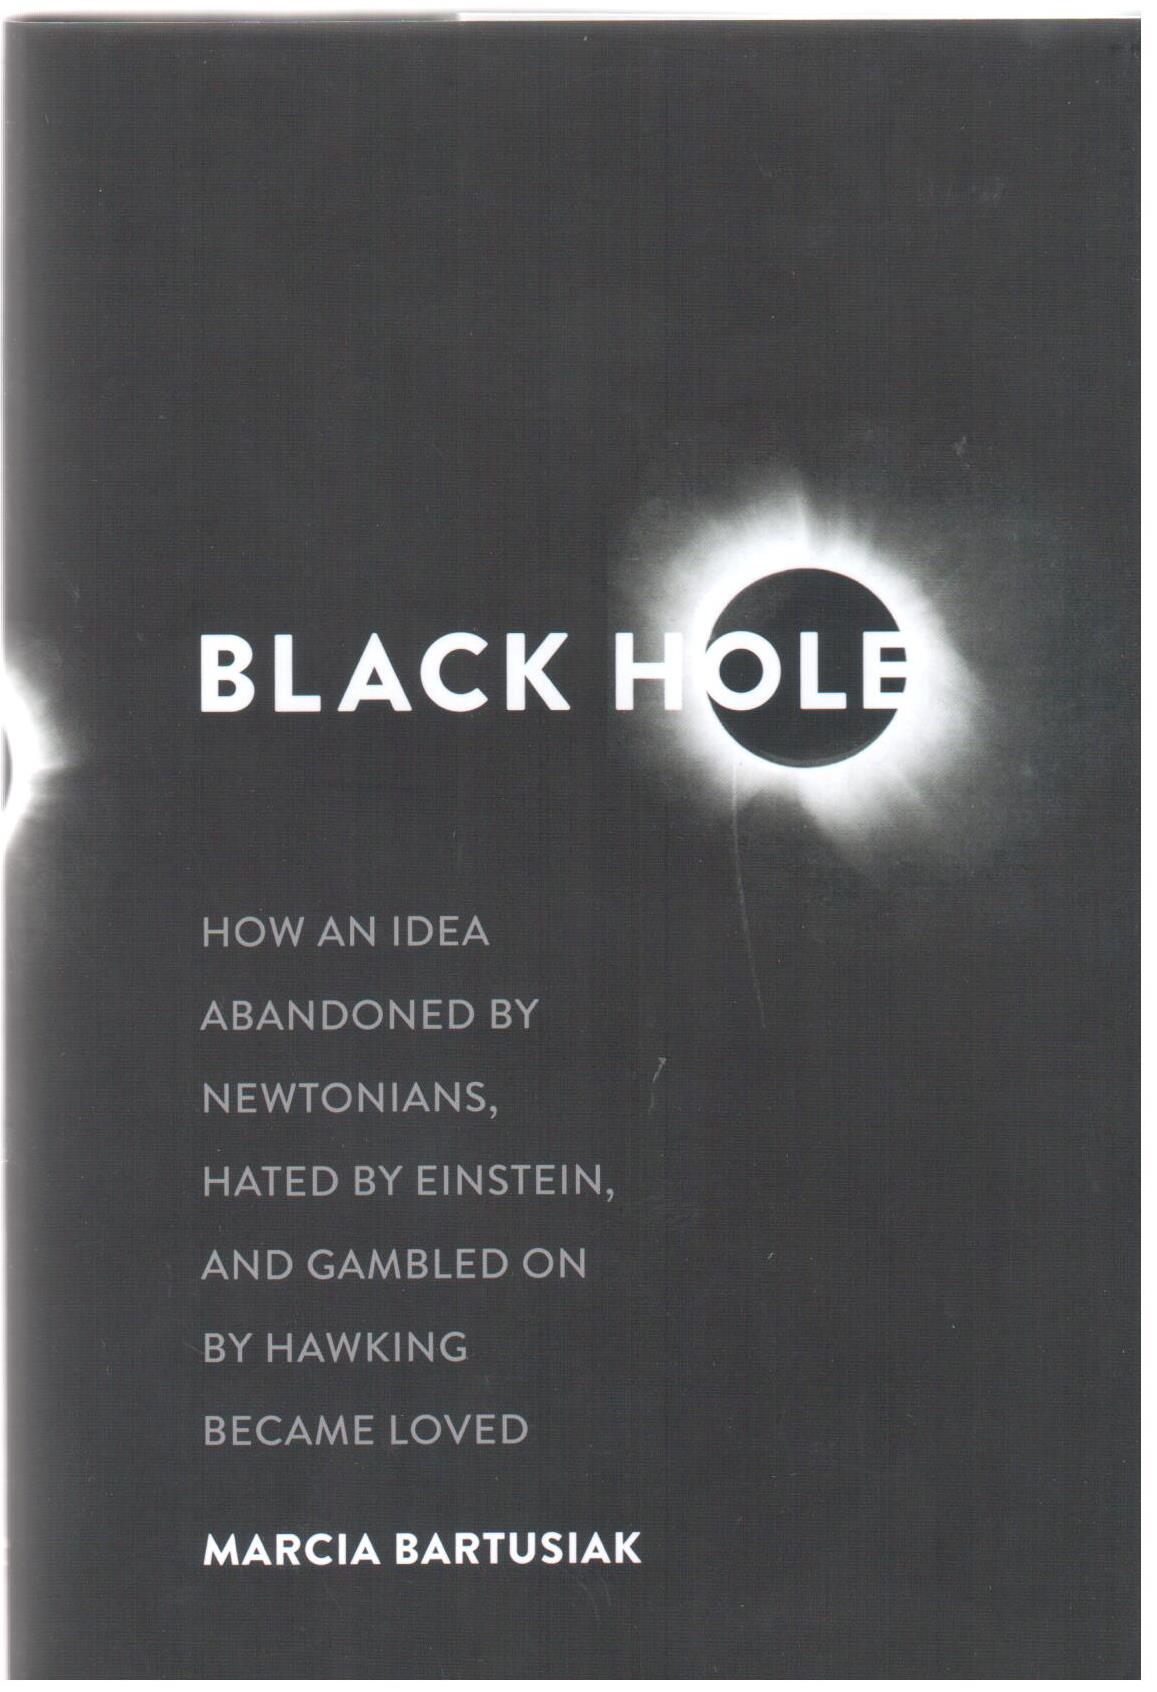 Black hole : how an idea abandoned by Newtonians, hated by Eienstein, and gambled on by Hawking became loved